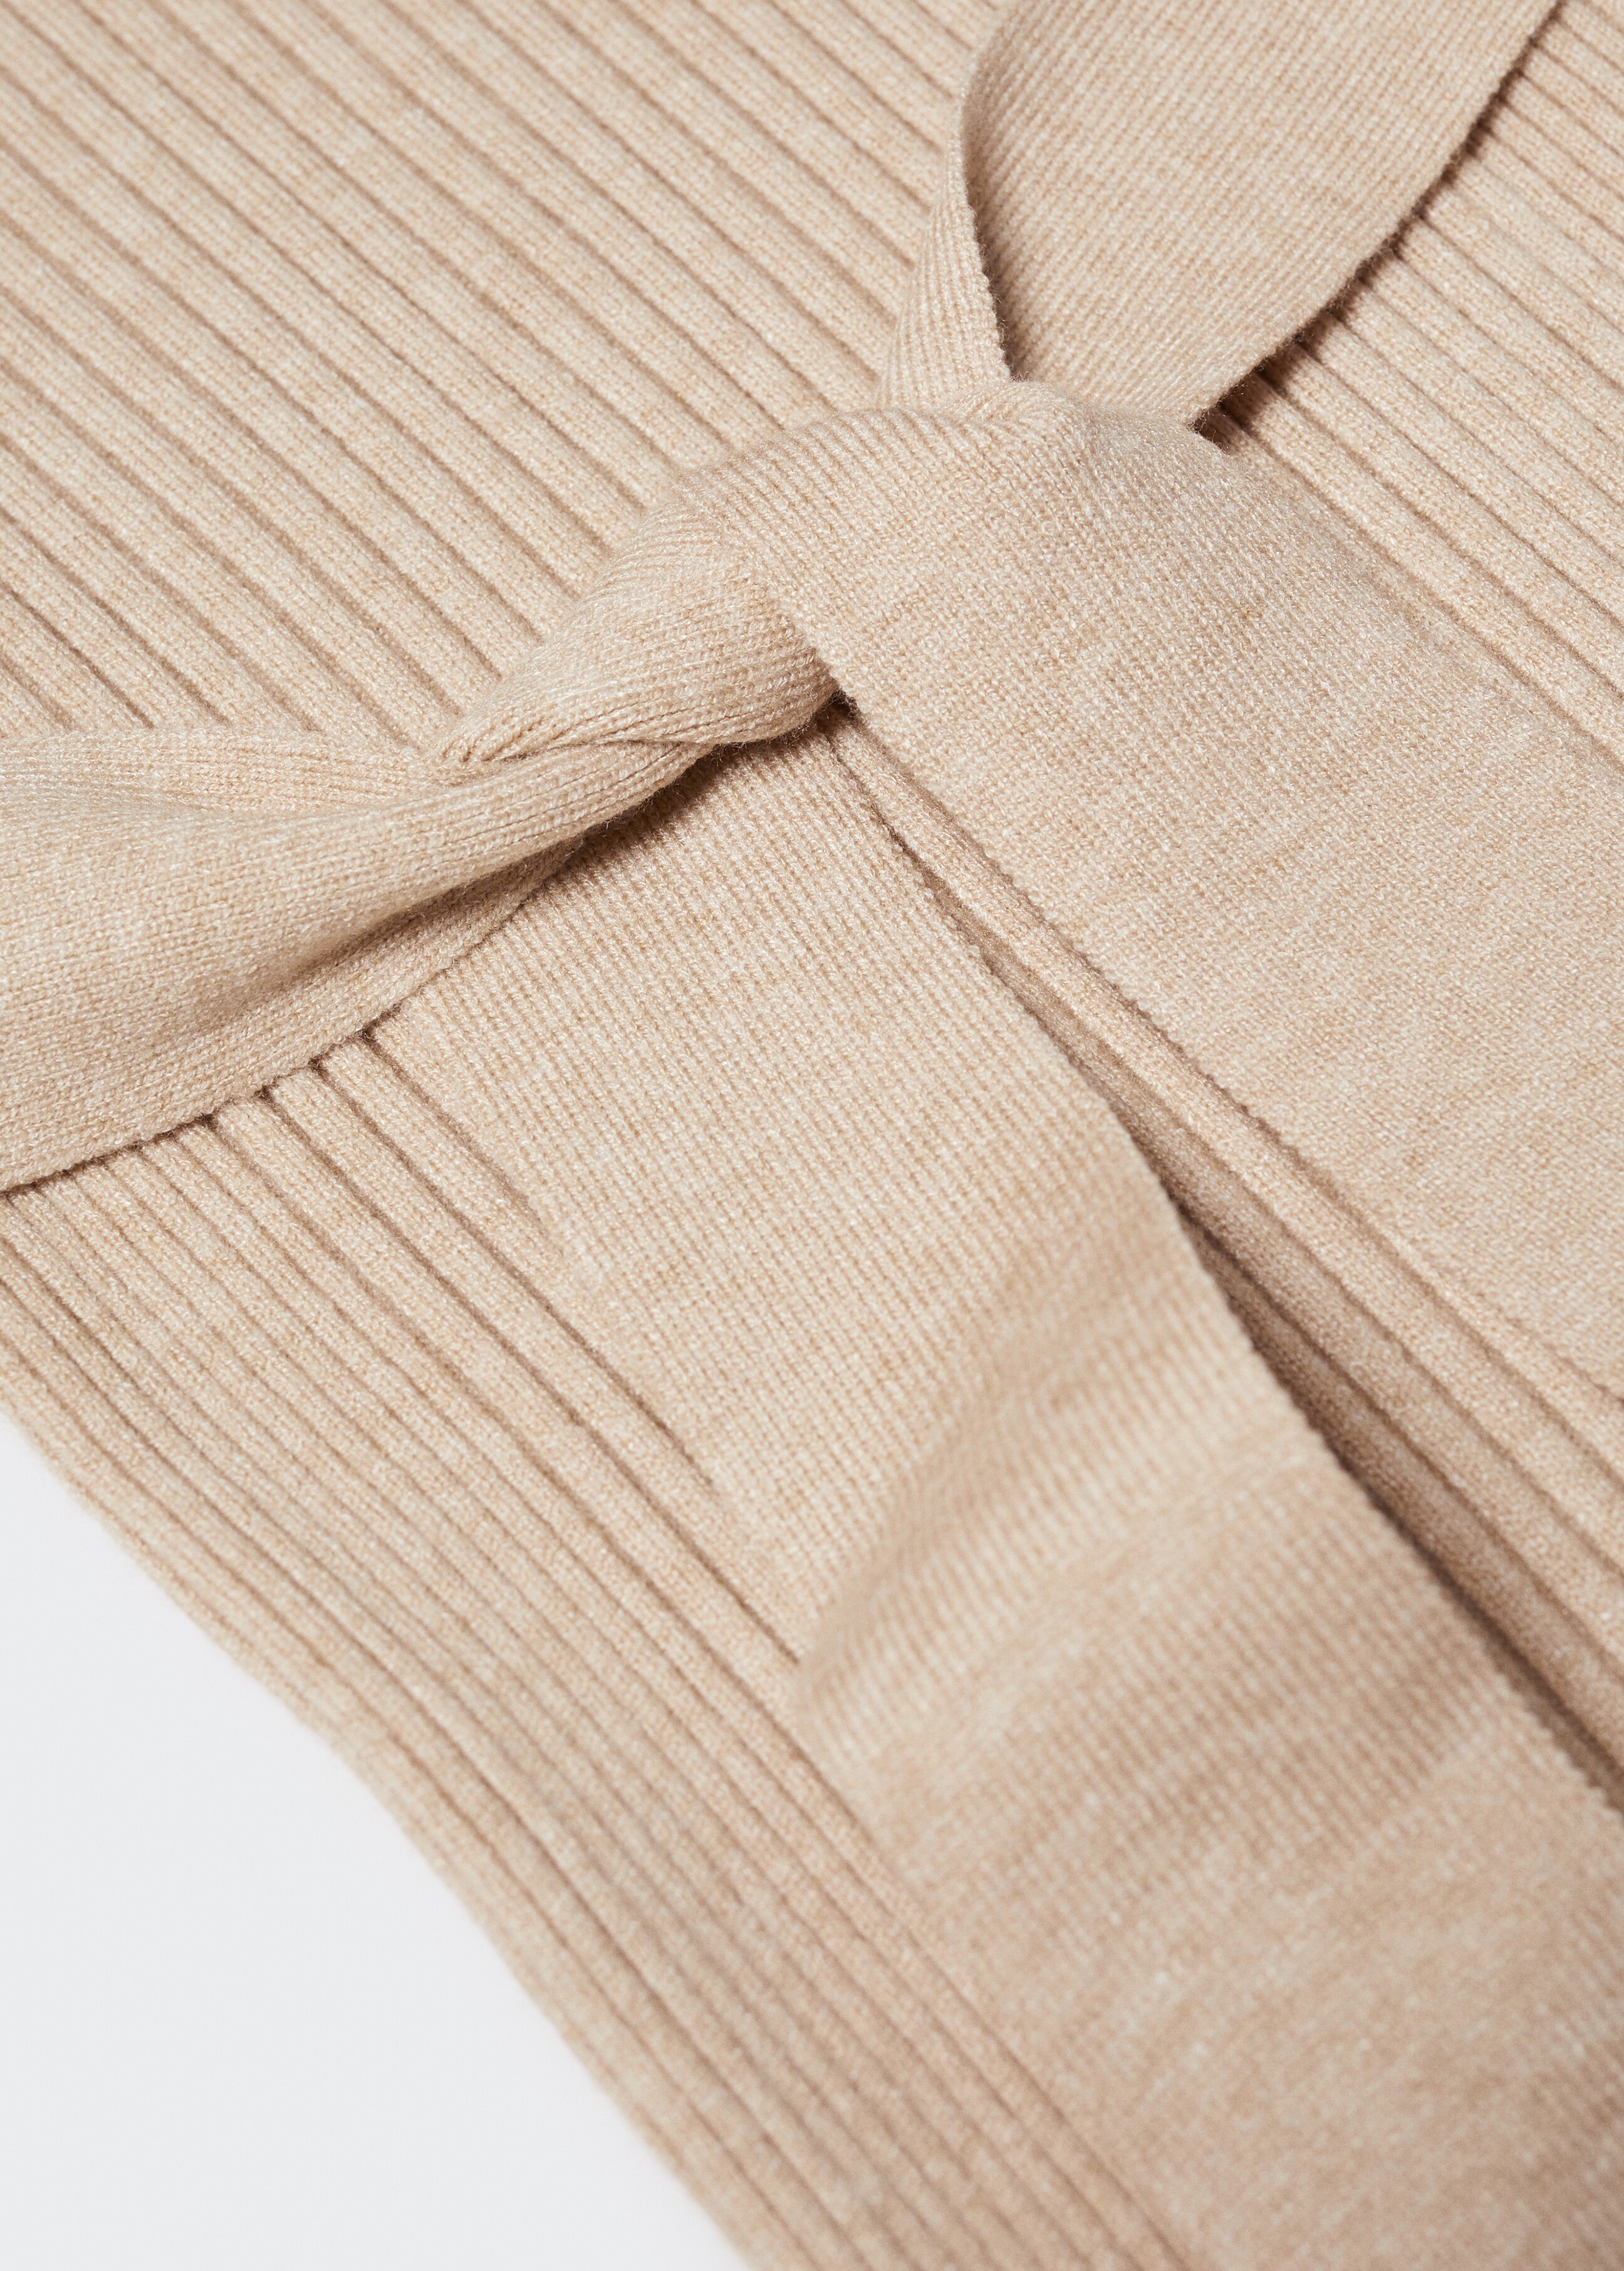 Ribbed dress with knot detail - Details of the article 8